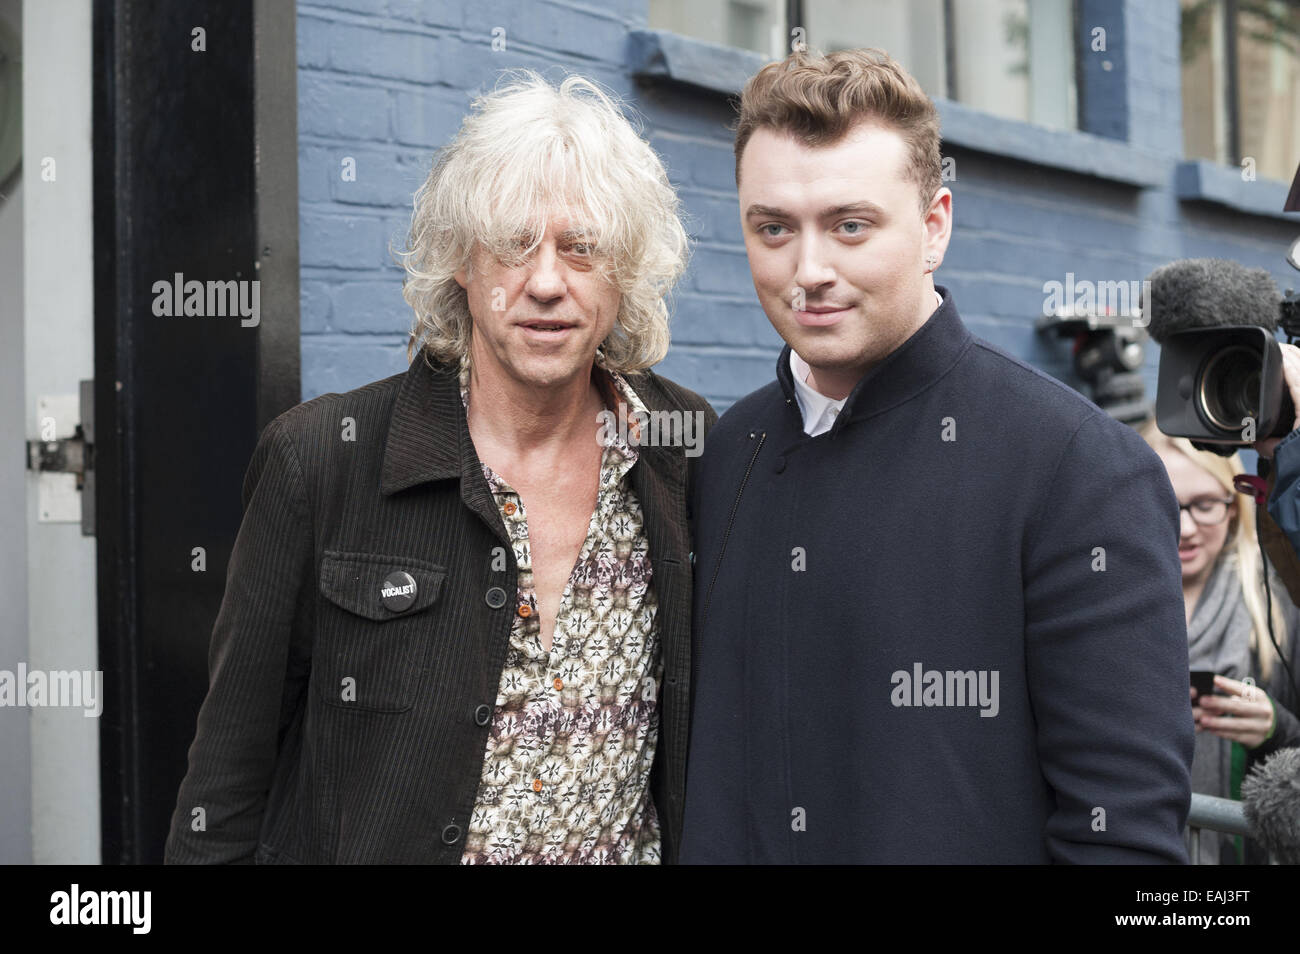 London, UK. 15th Nov, 2014. Bob Geldof greets Sam Smith outside Sarm Studios for the recording session of the updated Band Aid single. © Lee Thomas/ZUMA Wire/Alamy Live News Stock Photo